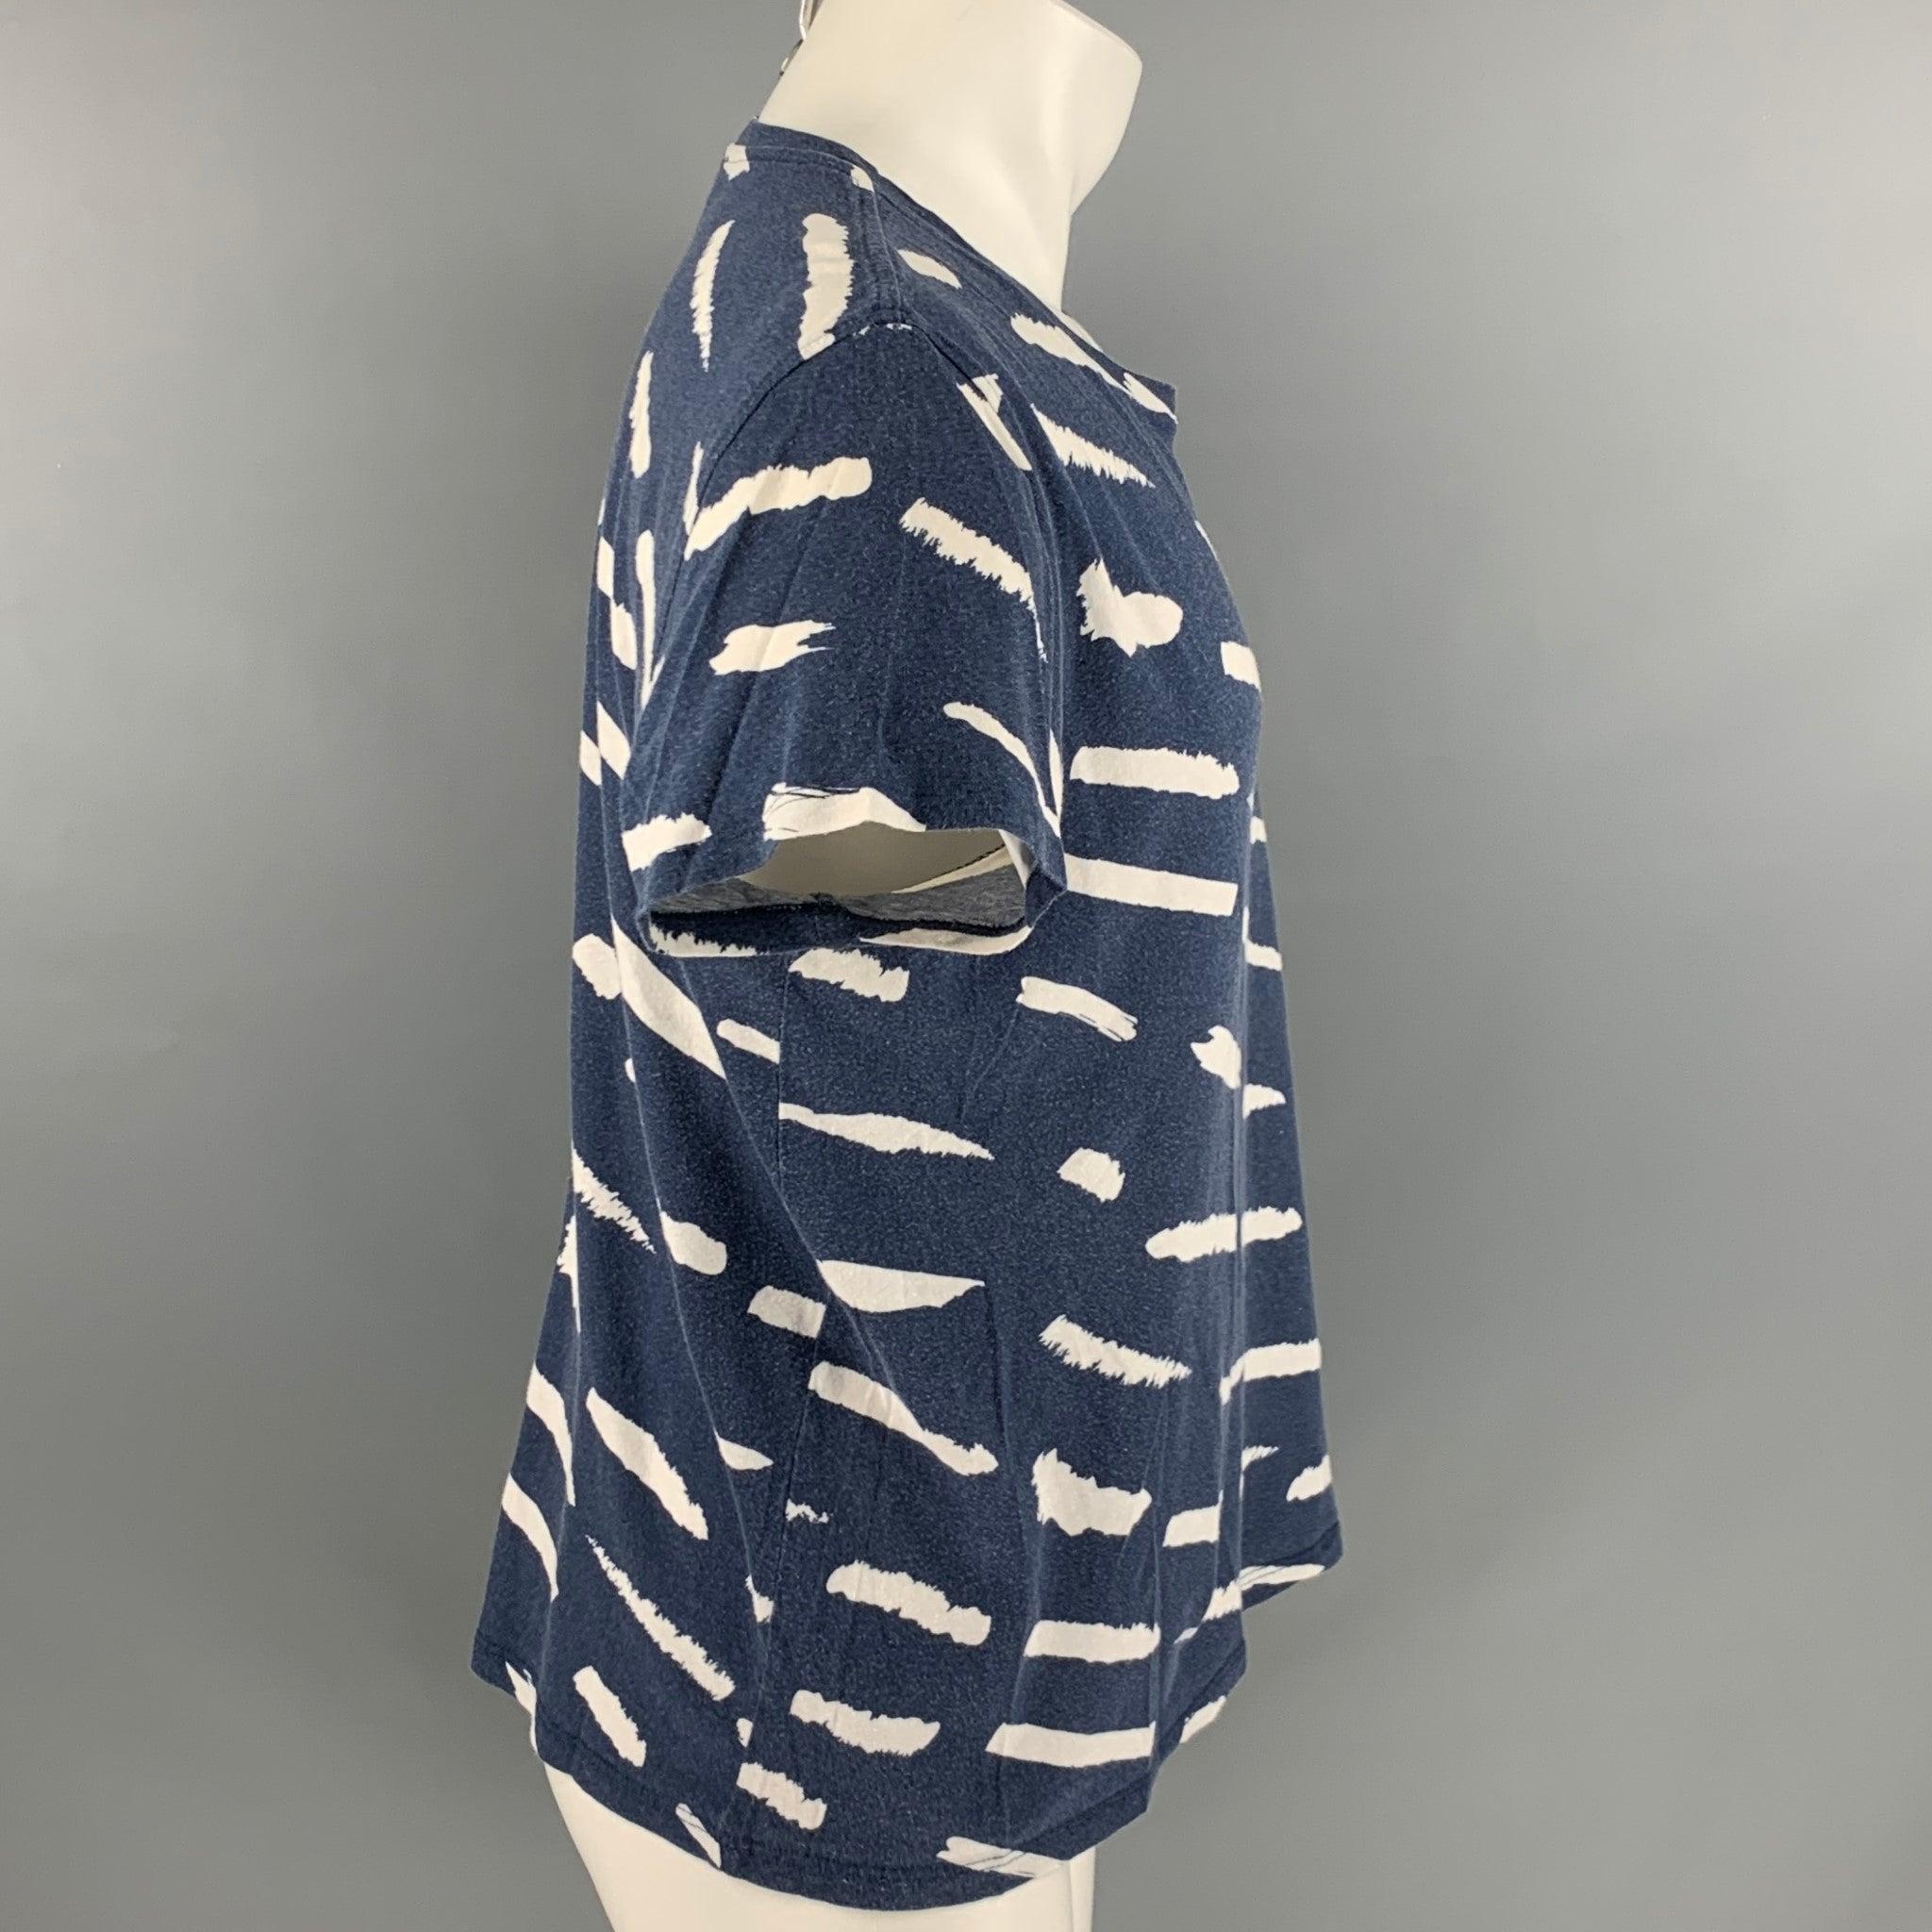 A.P.C. T-Shirt comes in navy and white cotton linen jersey and features a scoop neck.Good Pre-Owned Condition. Moderate Piling. 

Marked:   M 

Measurements: 
 
Shoulder: 18 inches Chest: 38 inches Sleeve: 8 inches Length: 25 inches 
  
  
  
